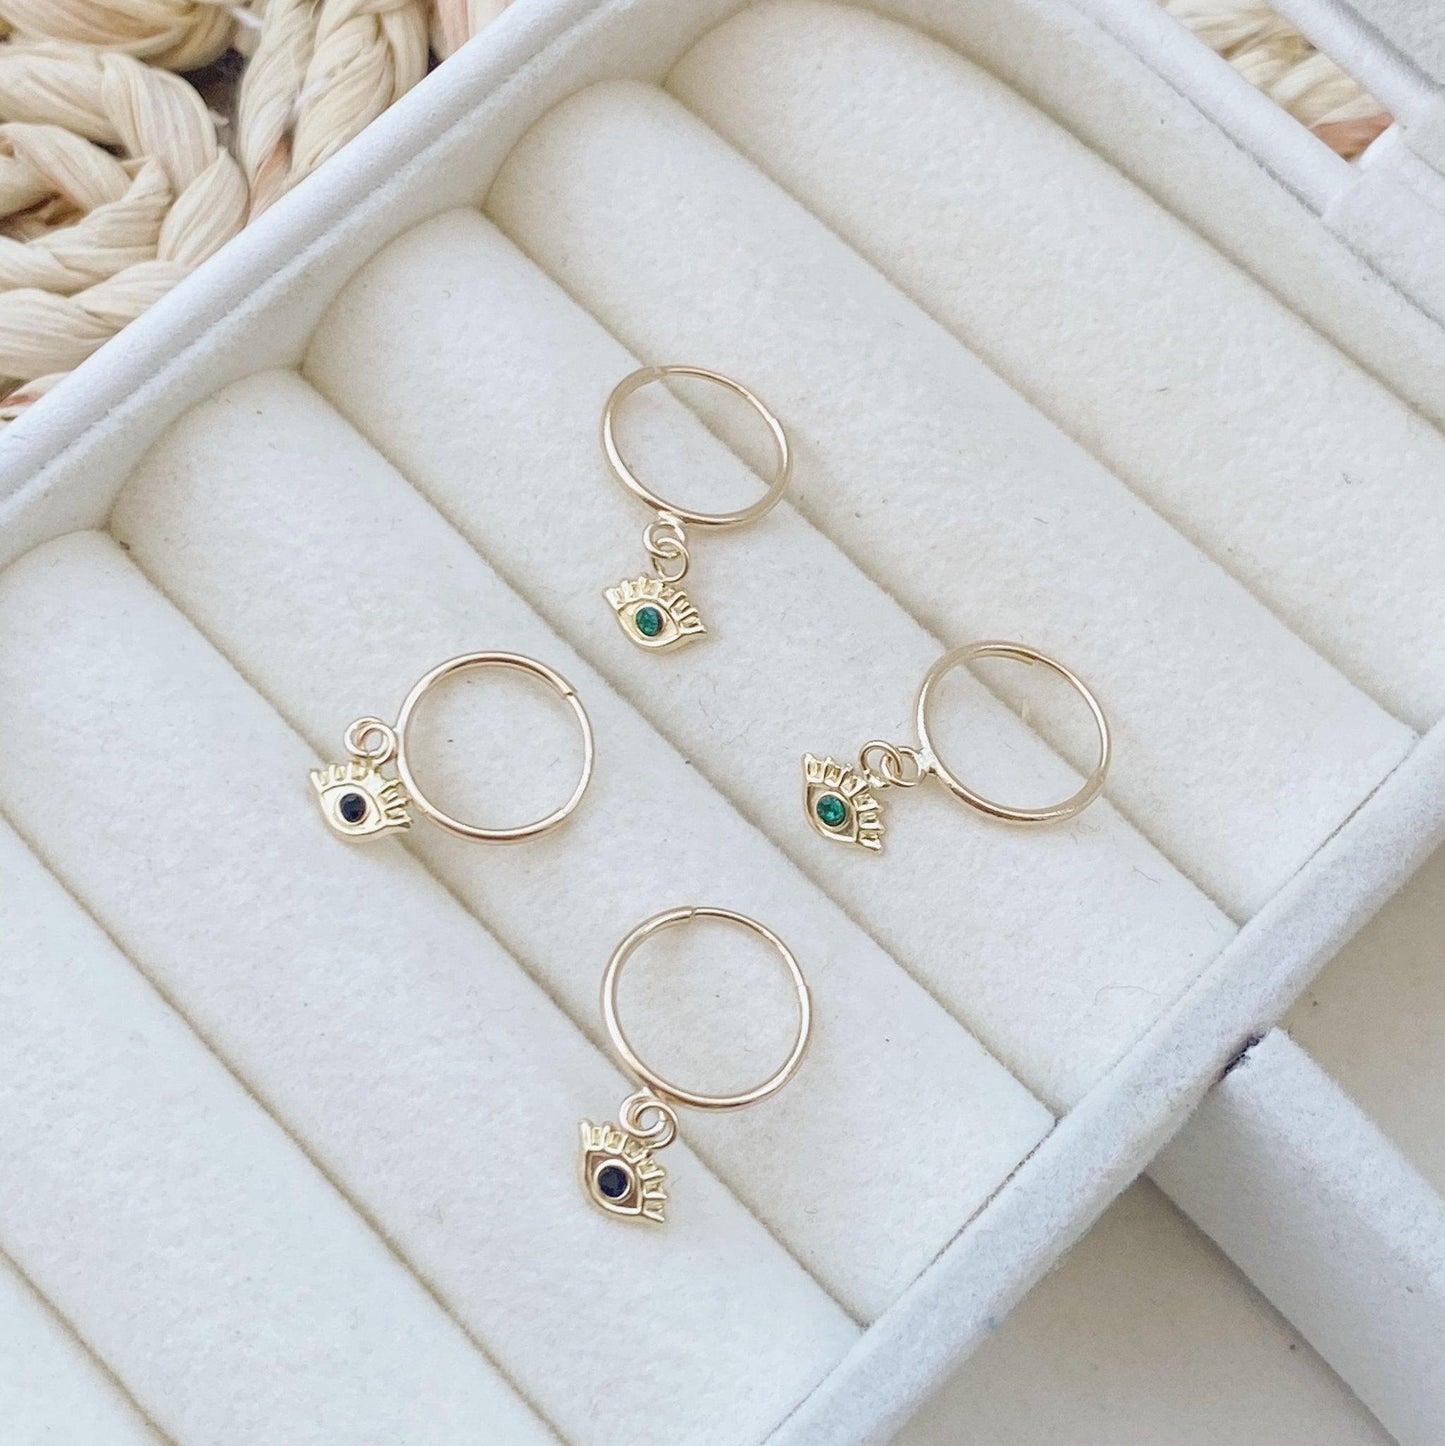 Looking for that perfect pair of gold evil eye hoops? This is it! These lightweight, 10K gold earrings are a perfect gift for yourself or someone you love. Perfect for everyday wear, the third eye hoops are great for classes, work or just running errands.